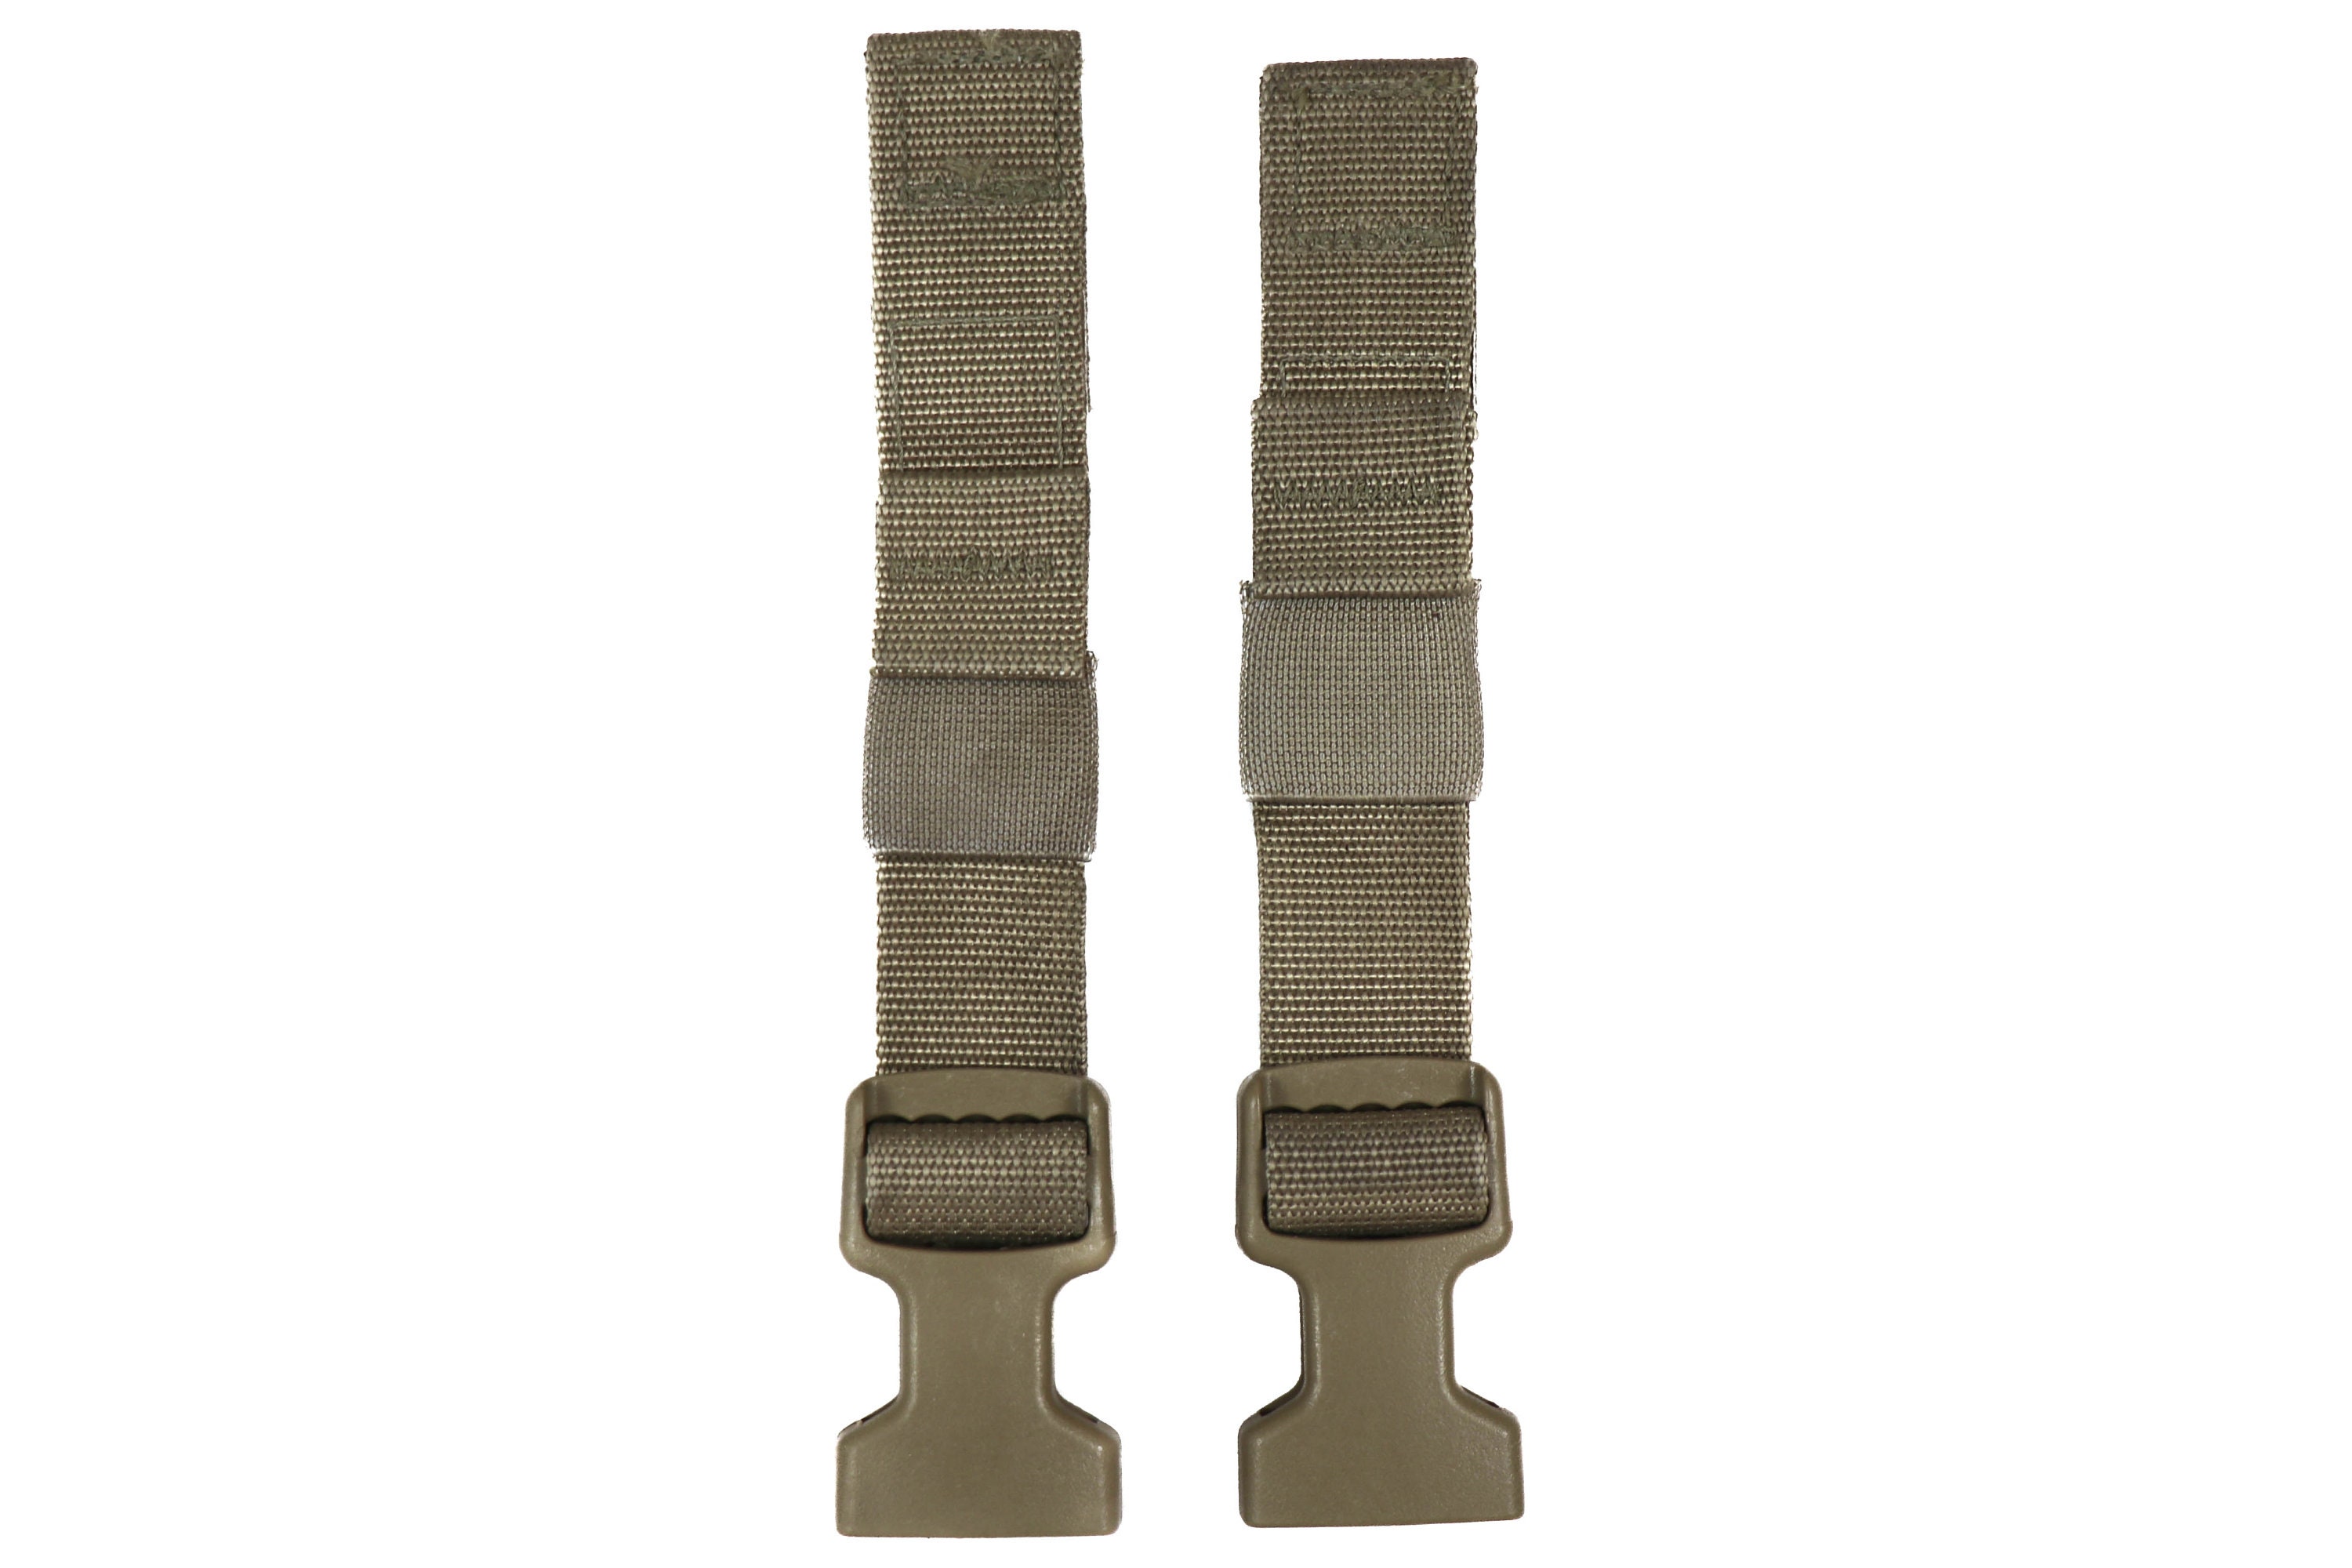 Tactical Molle D Type Nylon Attachment Straps for Bags and Backpacks black/  Set of 2 